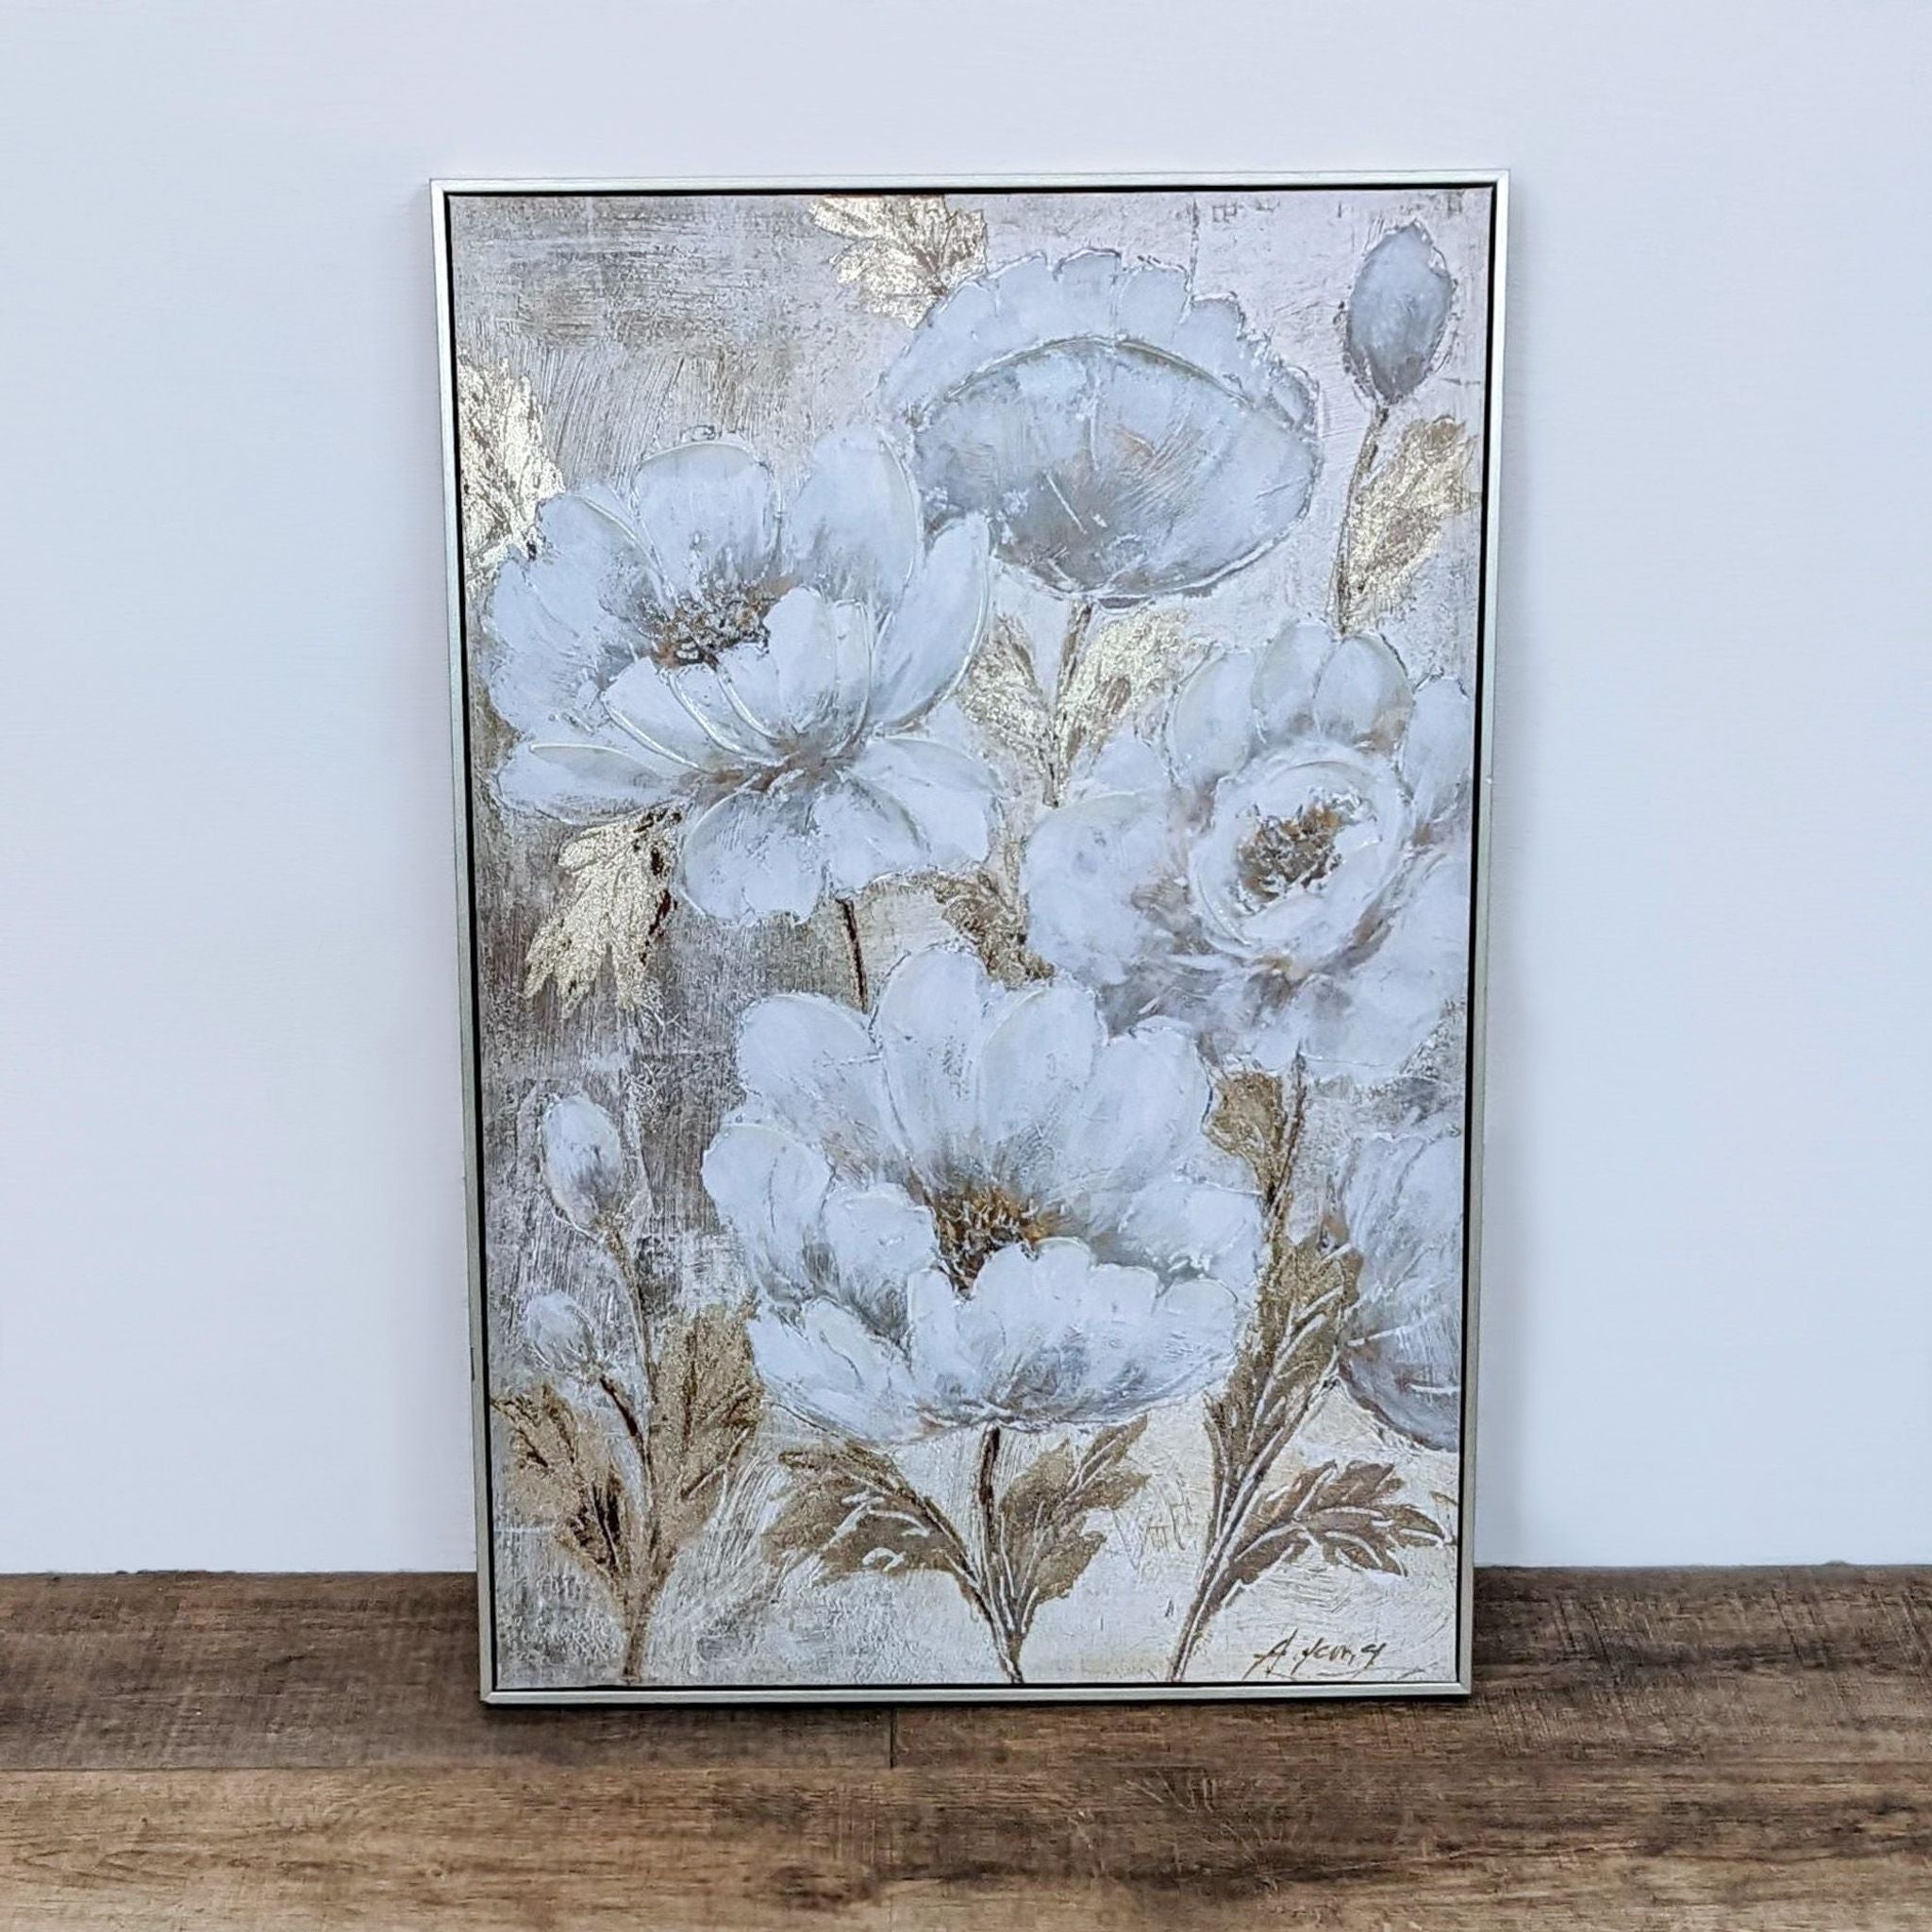 Reperch brand framed floral art on canvas with shimmering metallic accents.